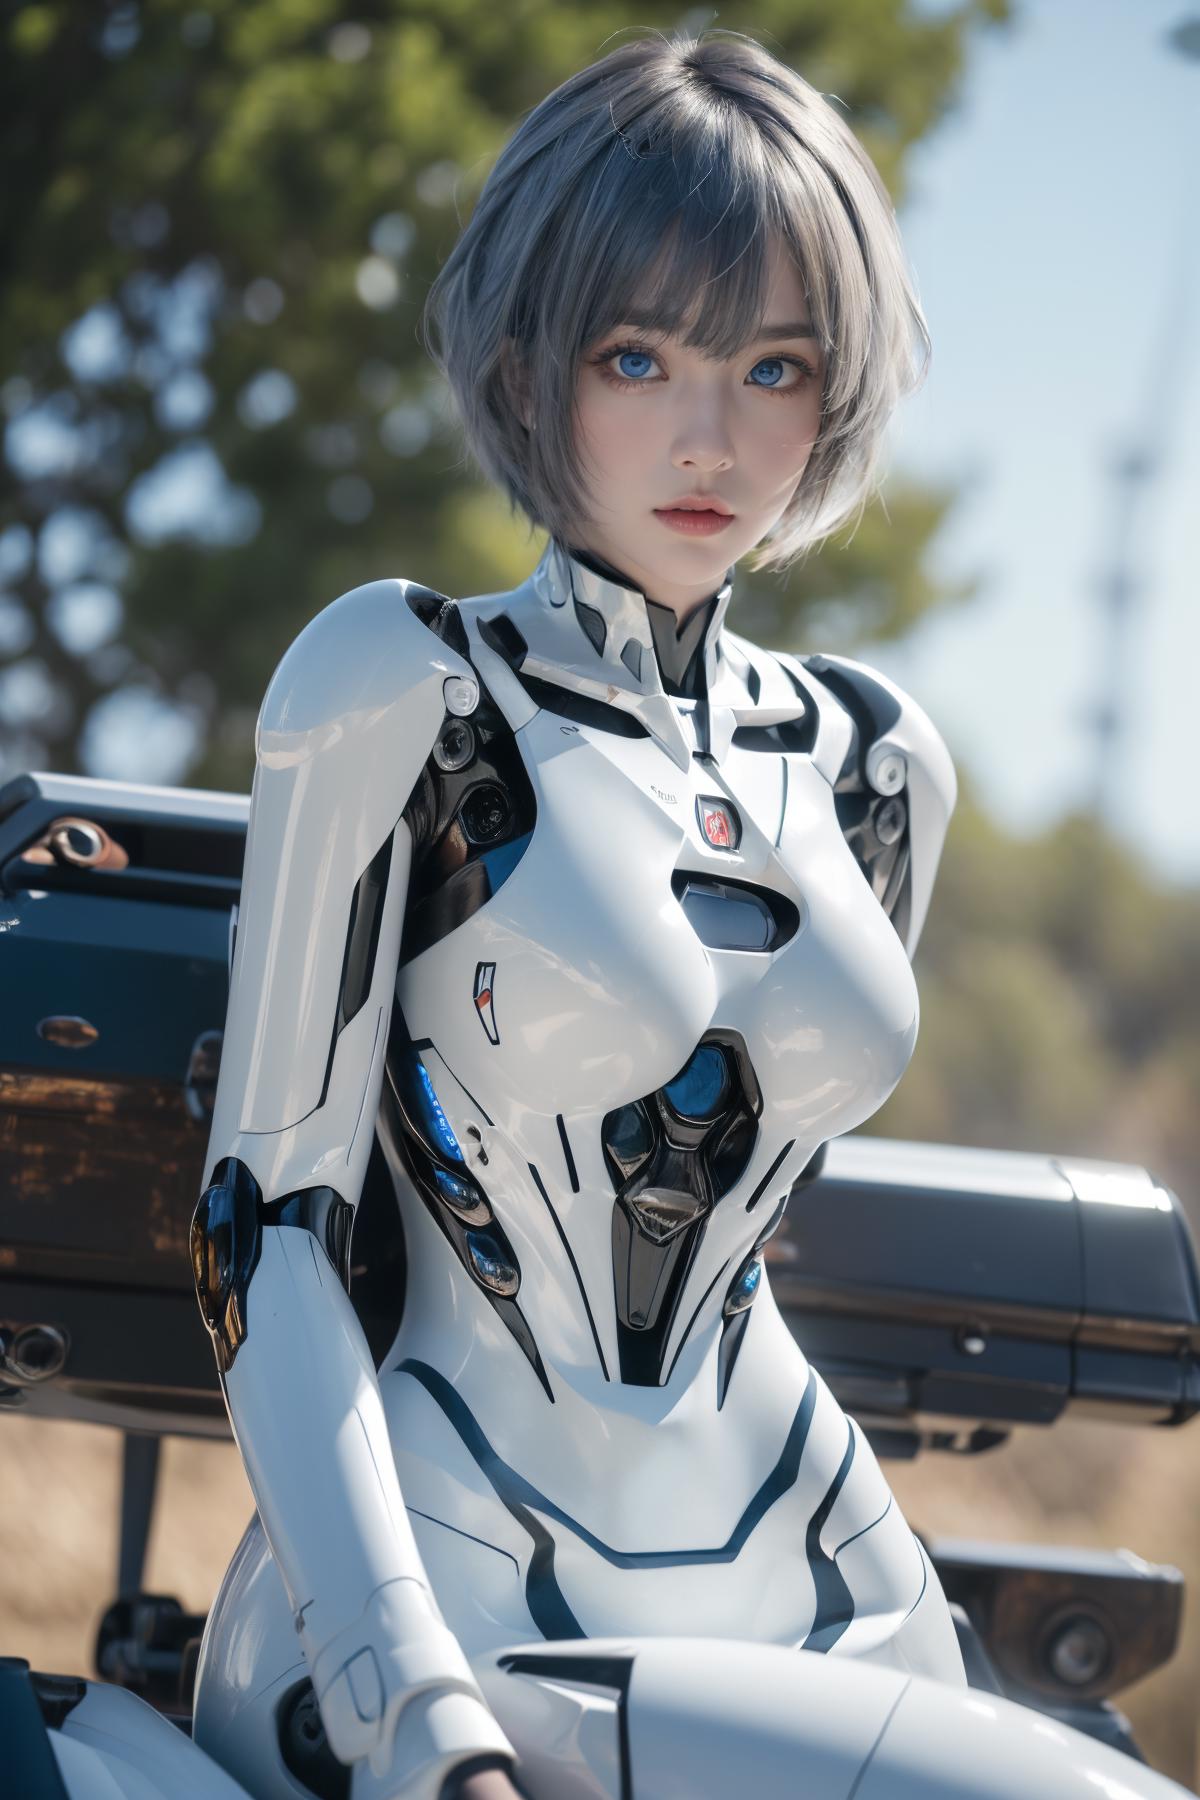 AI model image by marshall424